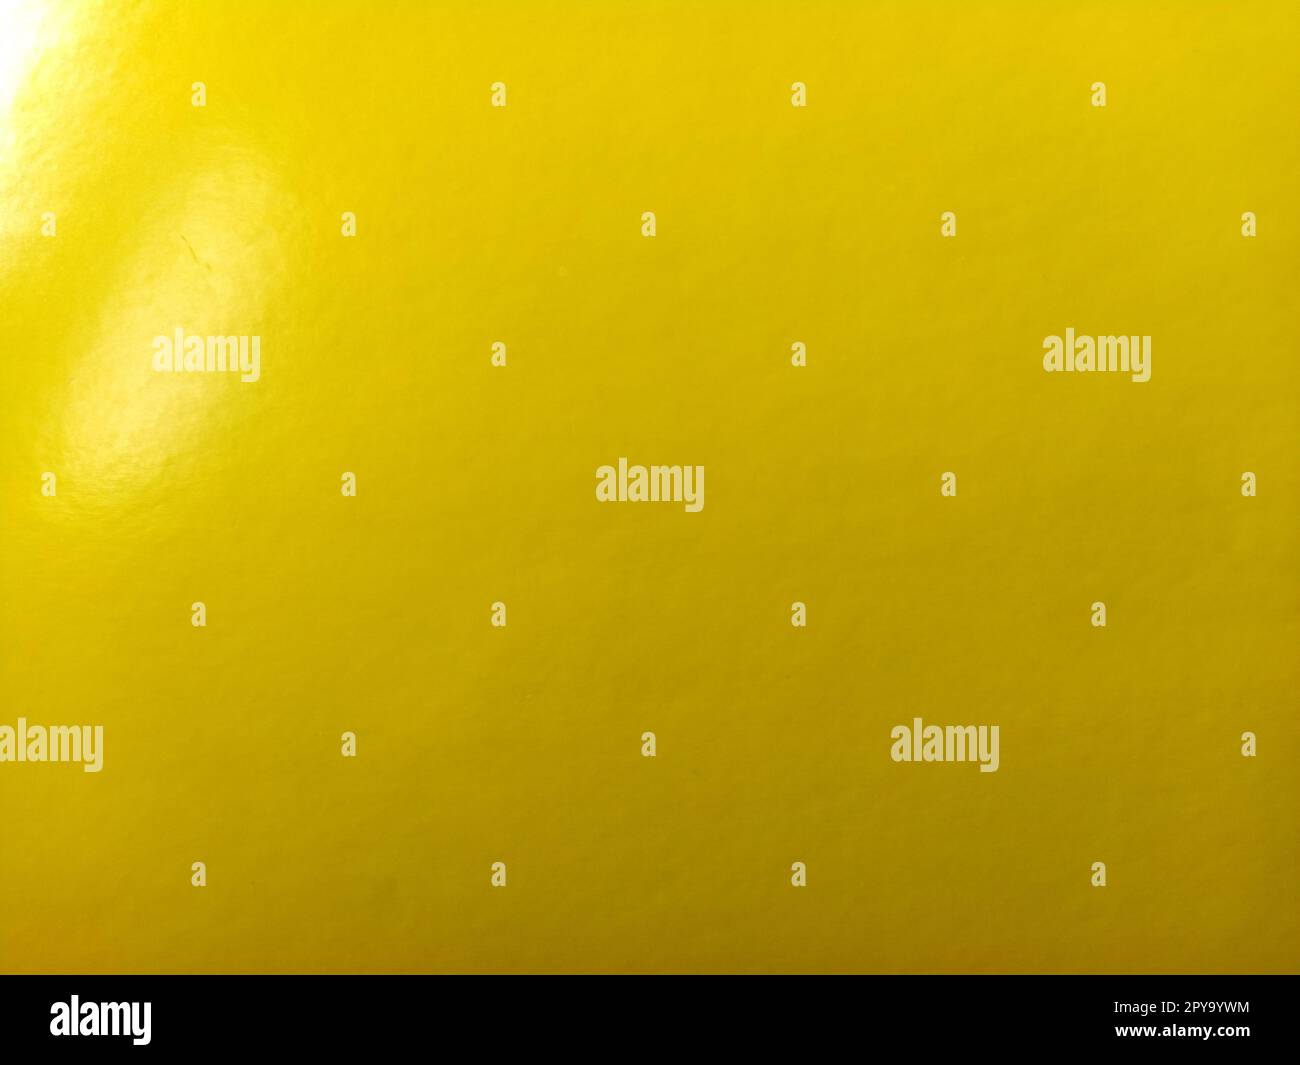 Beautiful bright yellow background. Close-up sheet of shiny reflective incident light paper. Pure fun color. Intense shade of yellow, close to gold or sunny with high reflectivity. Stock Photo